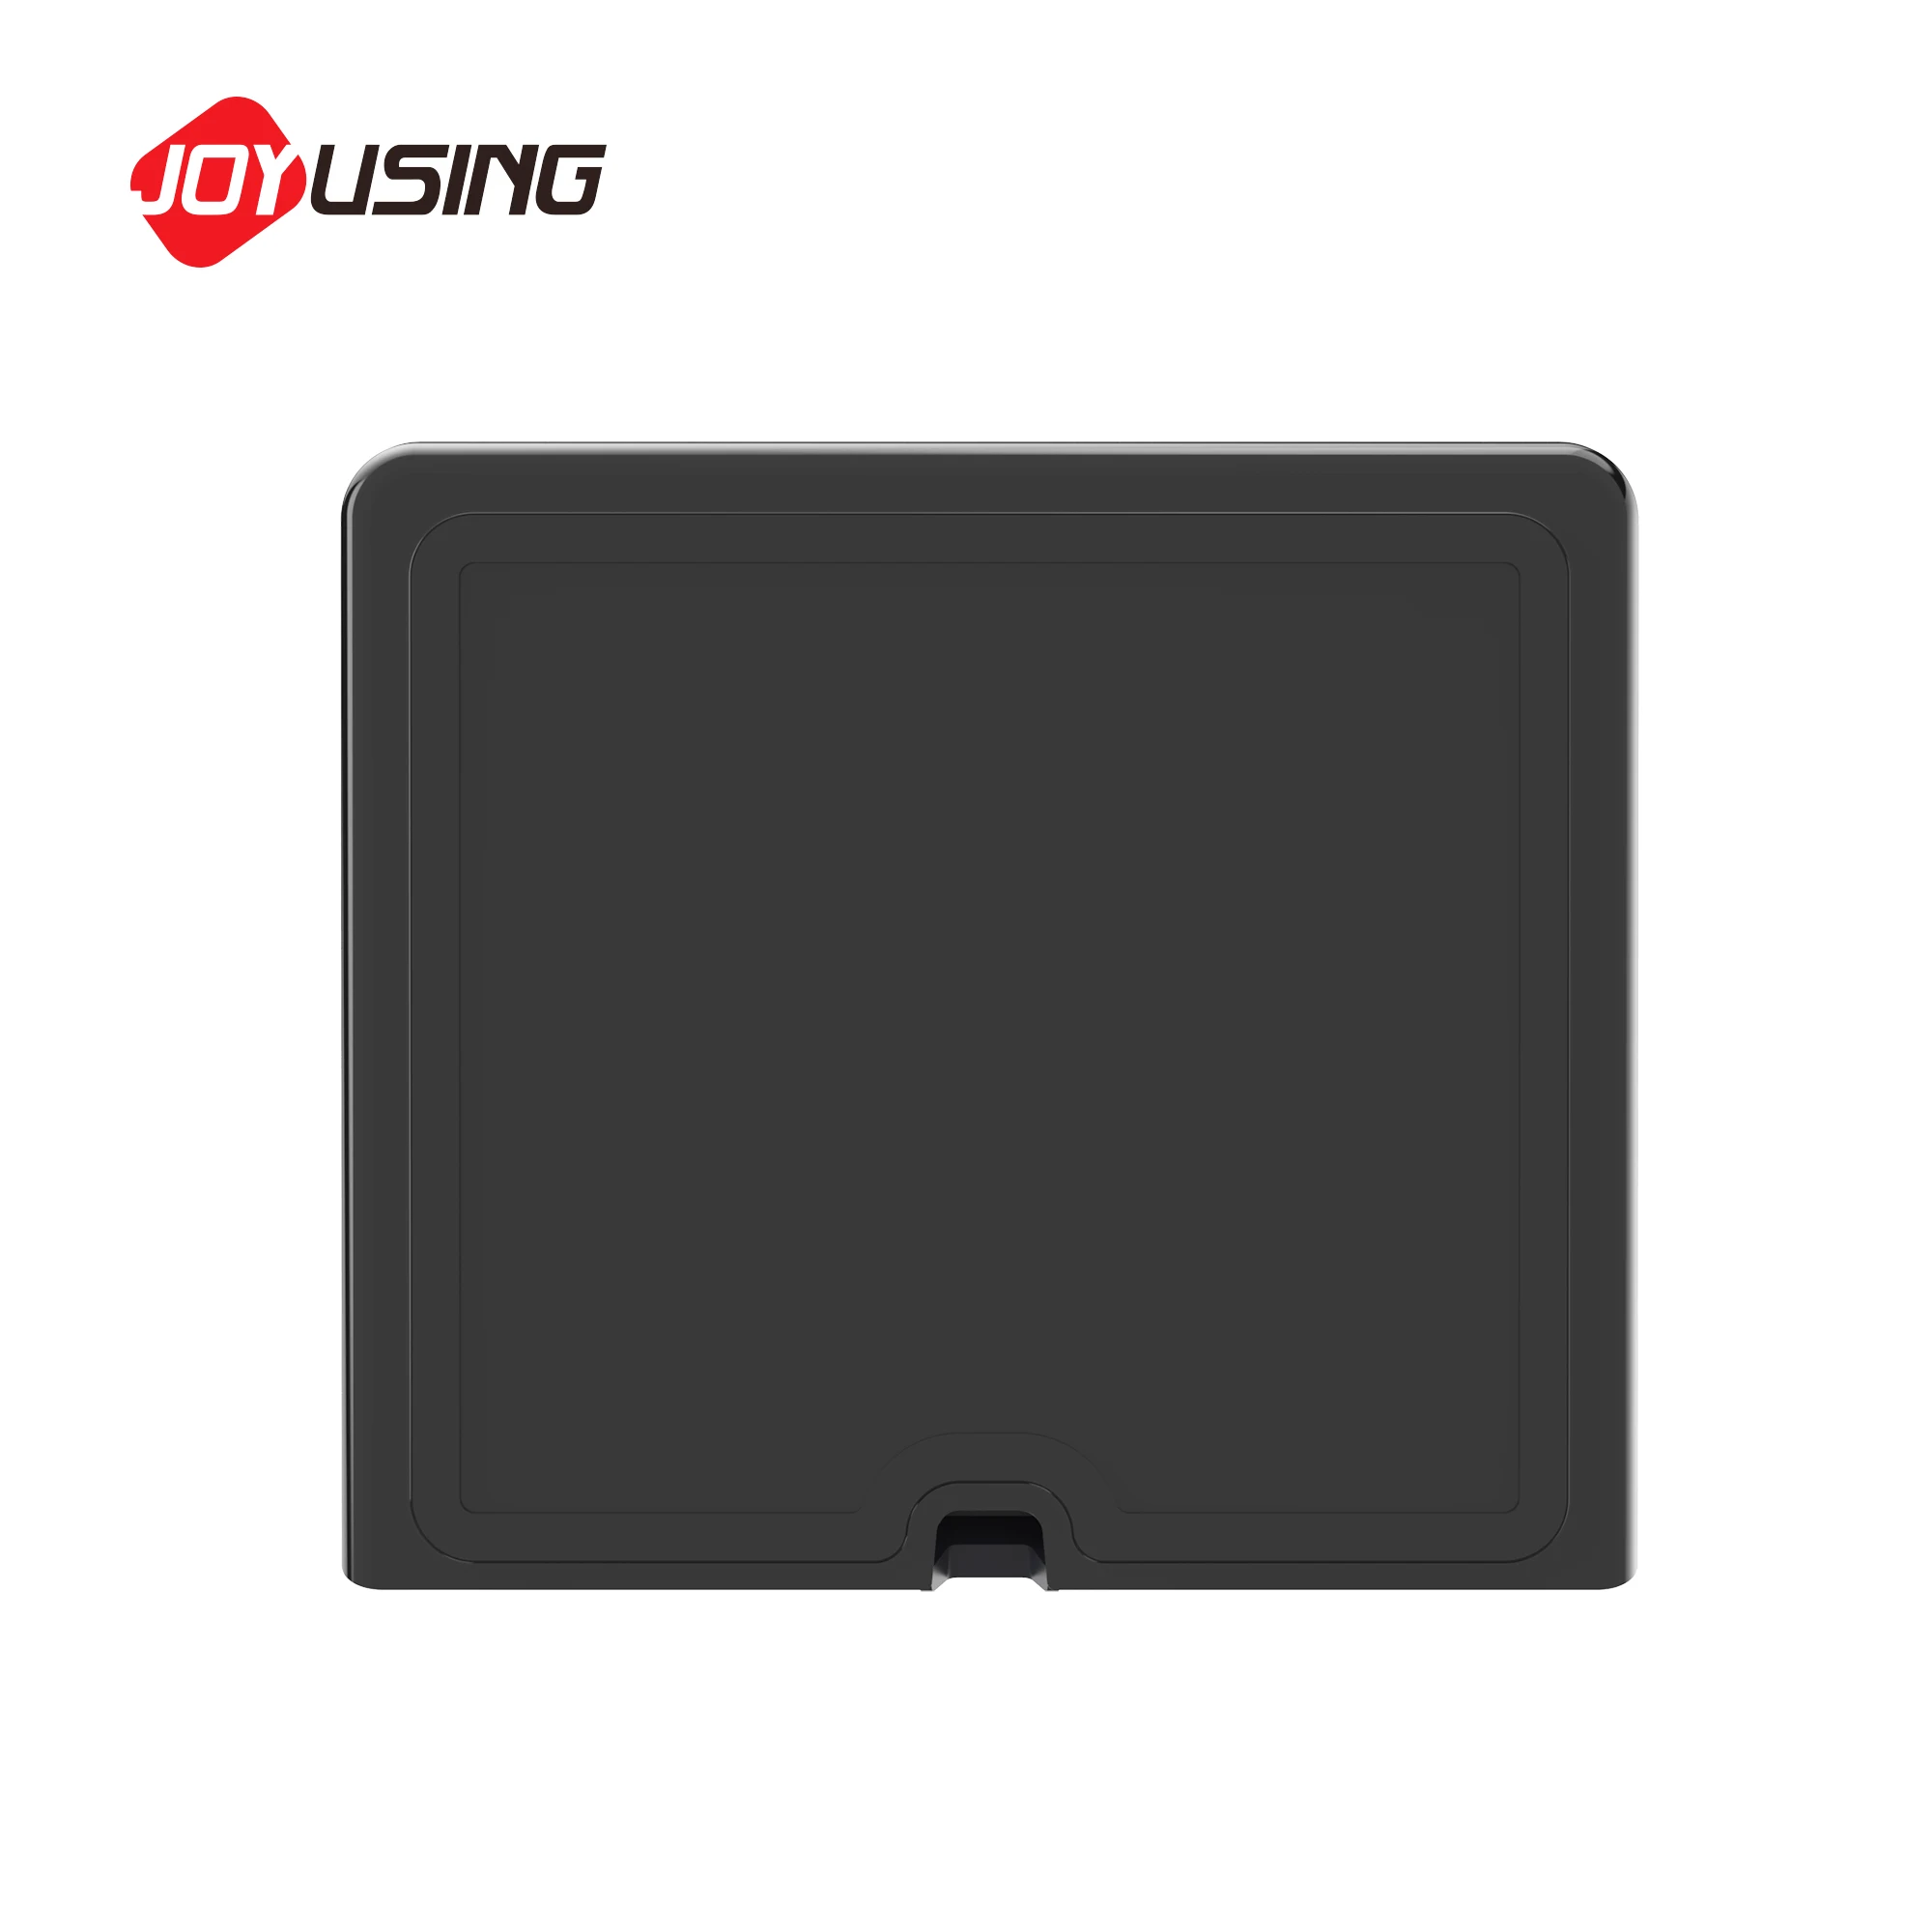 Signature pad factory price for bank hospitality  digital signing with pen tablet LCD signature pad with stylus